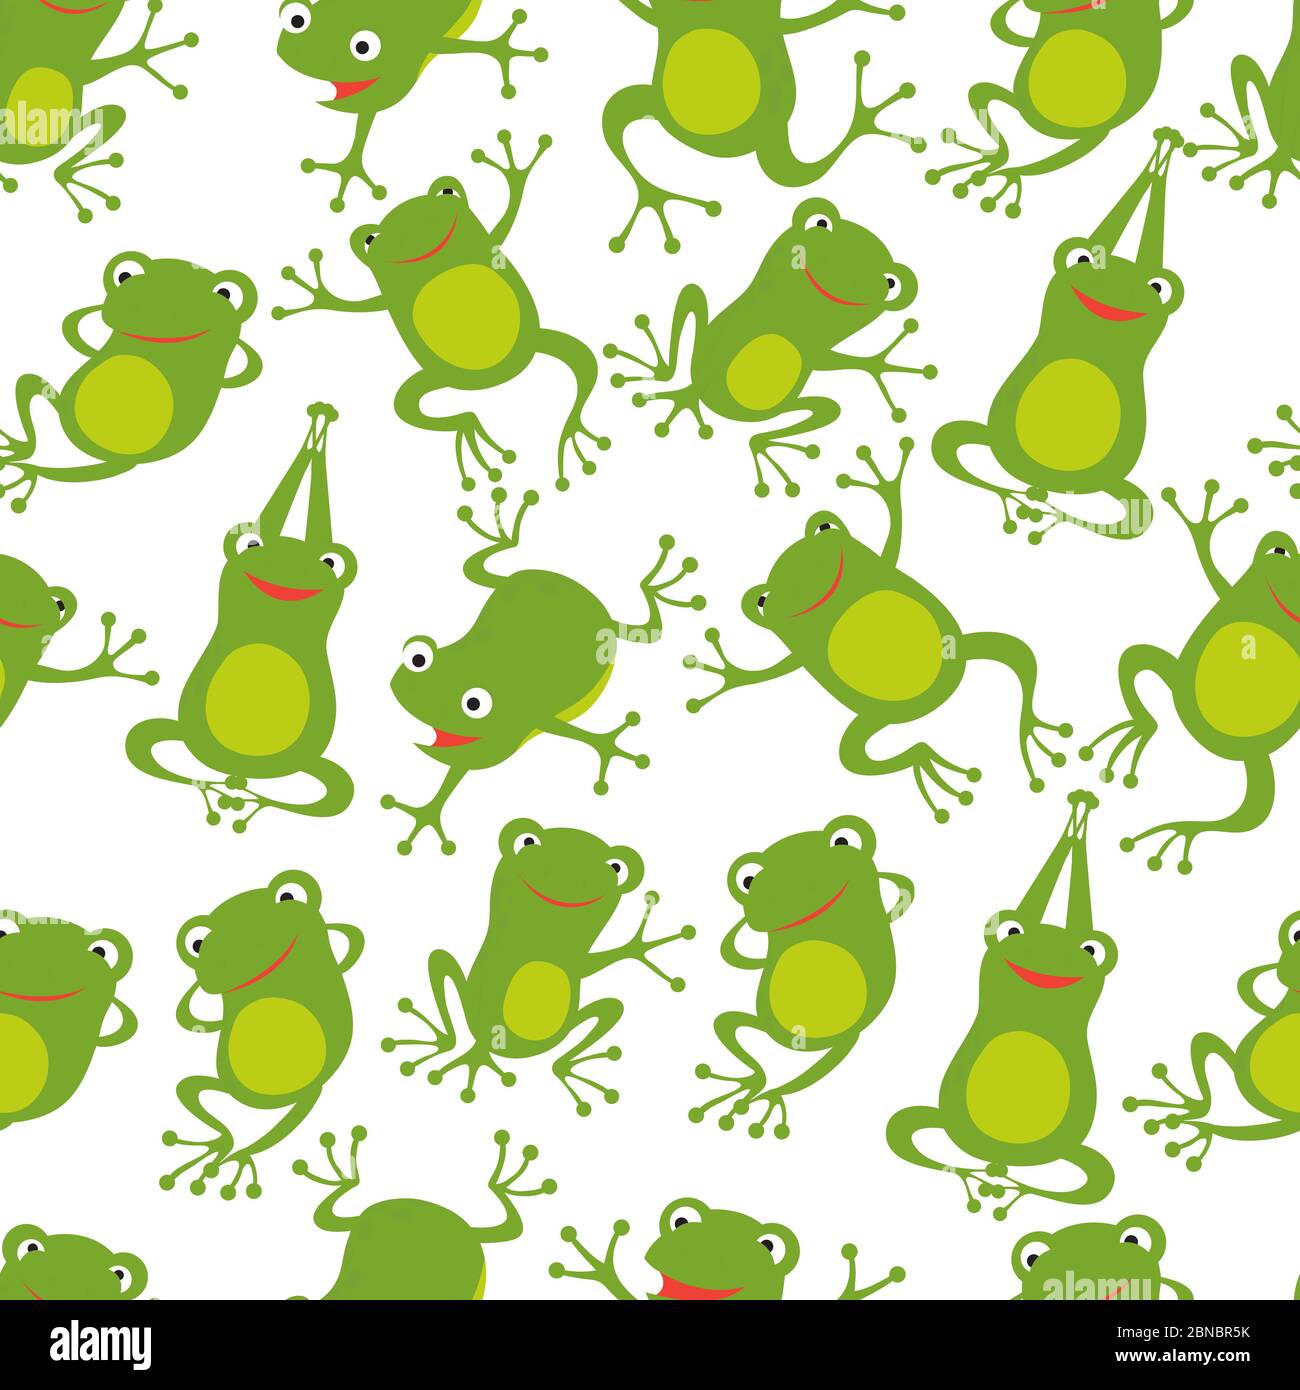 Free and customizable frog templates